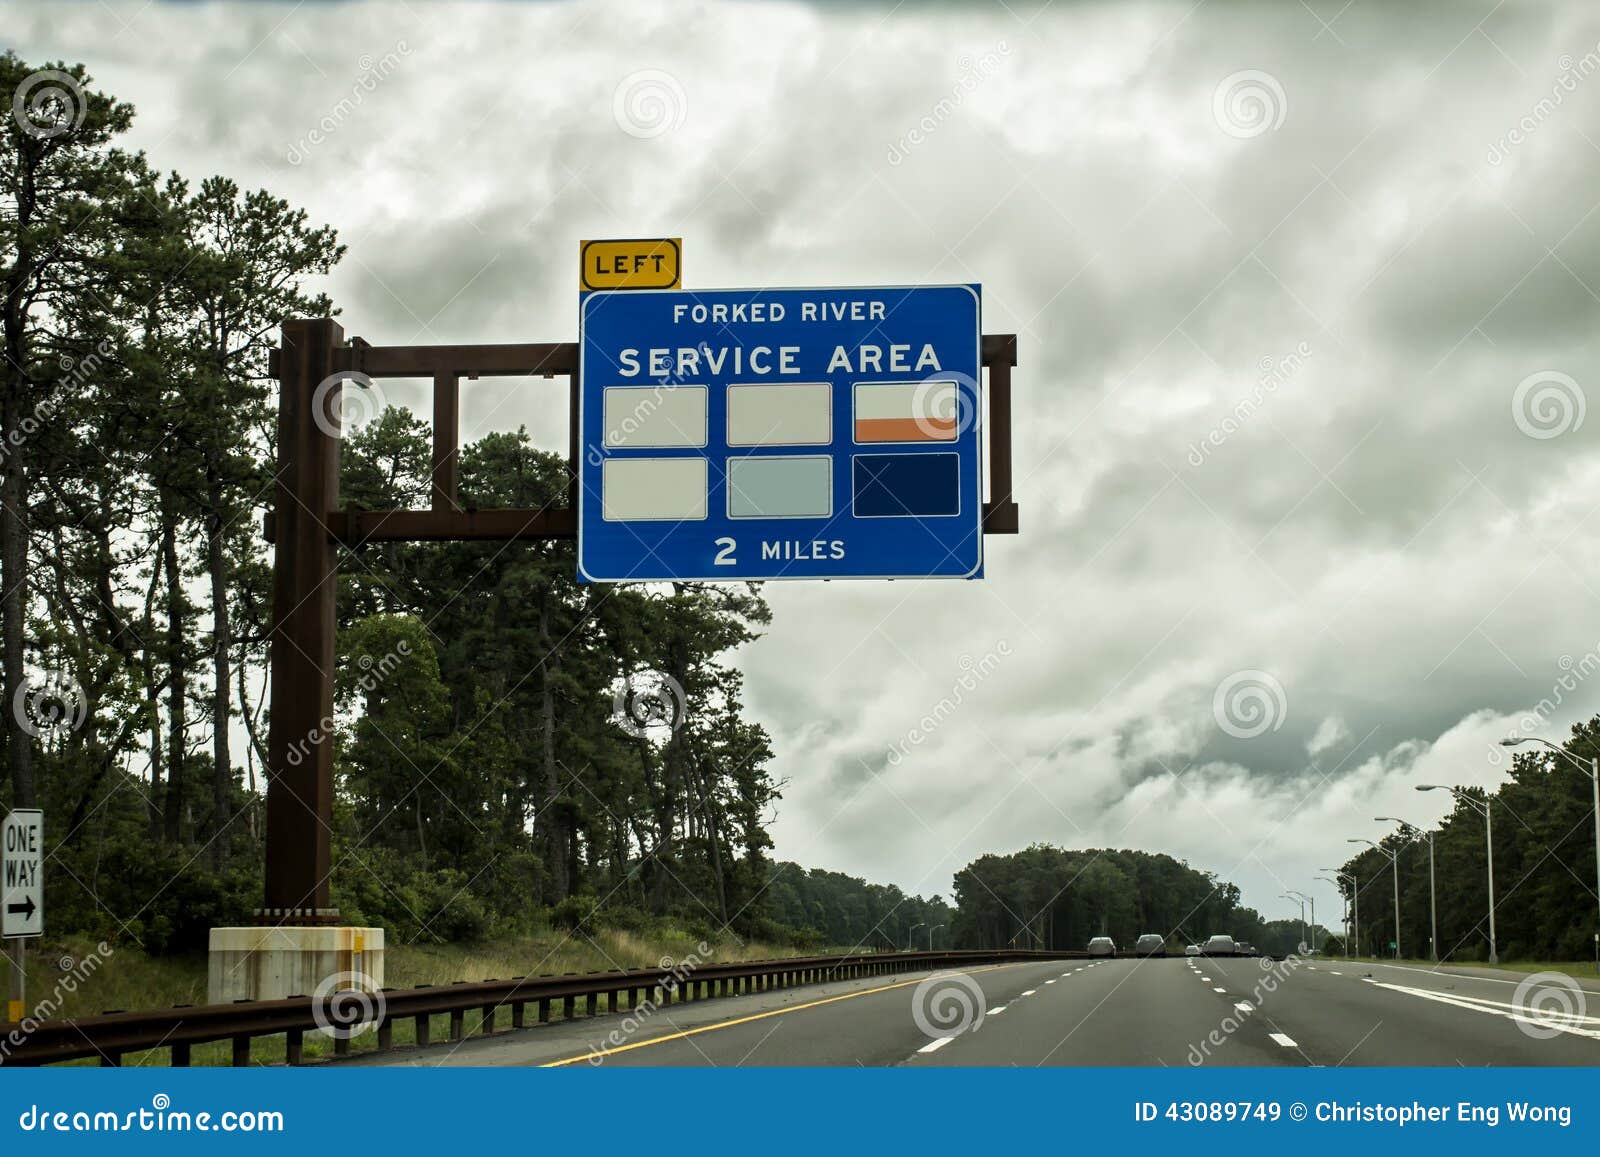 Garden State Parkway Photos - Free Royalty-free Stock Photos From Dreamstime